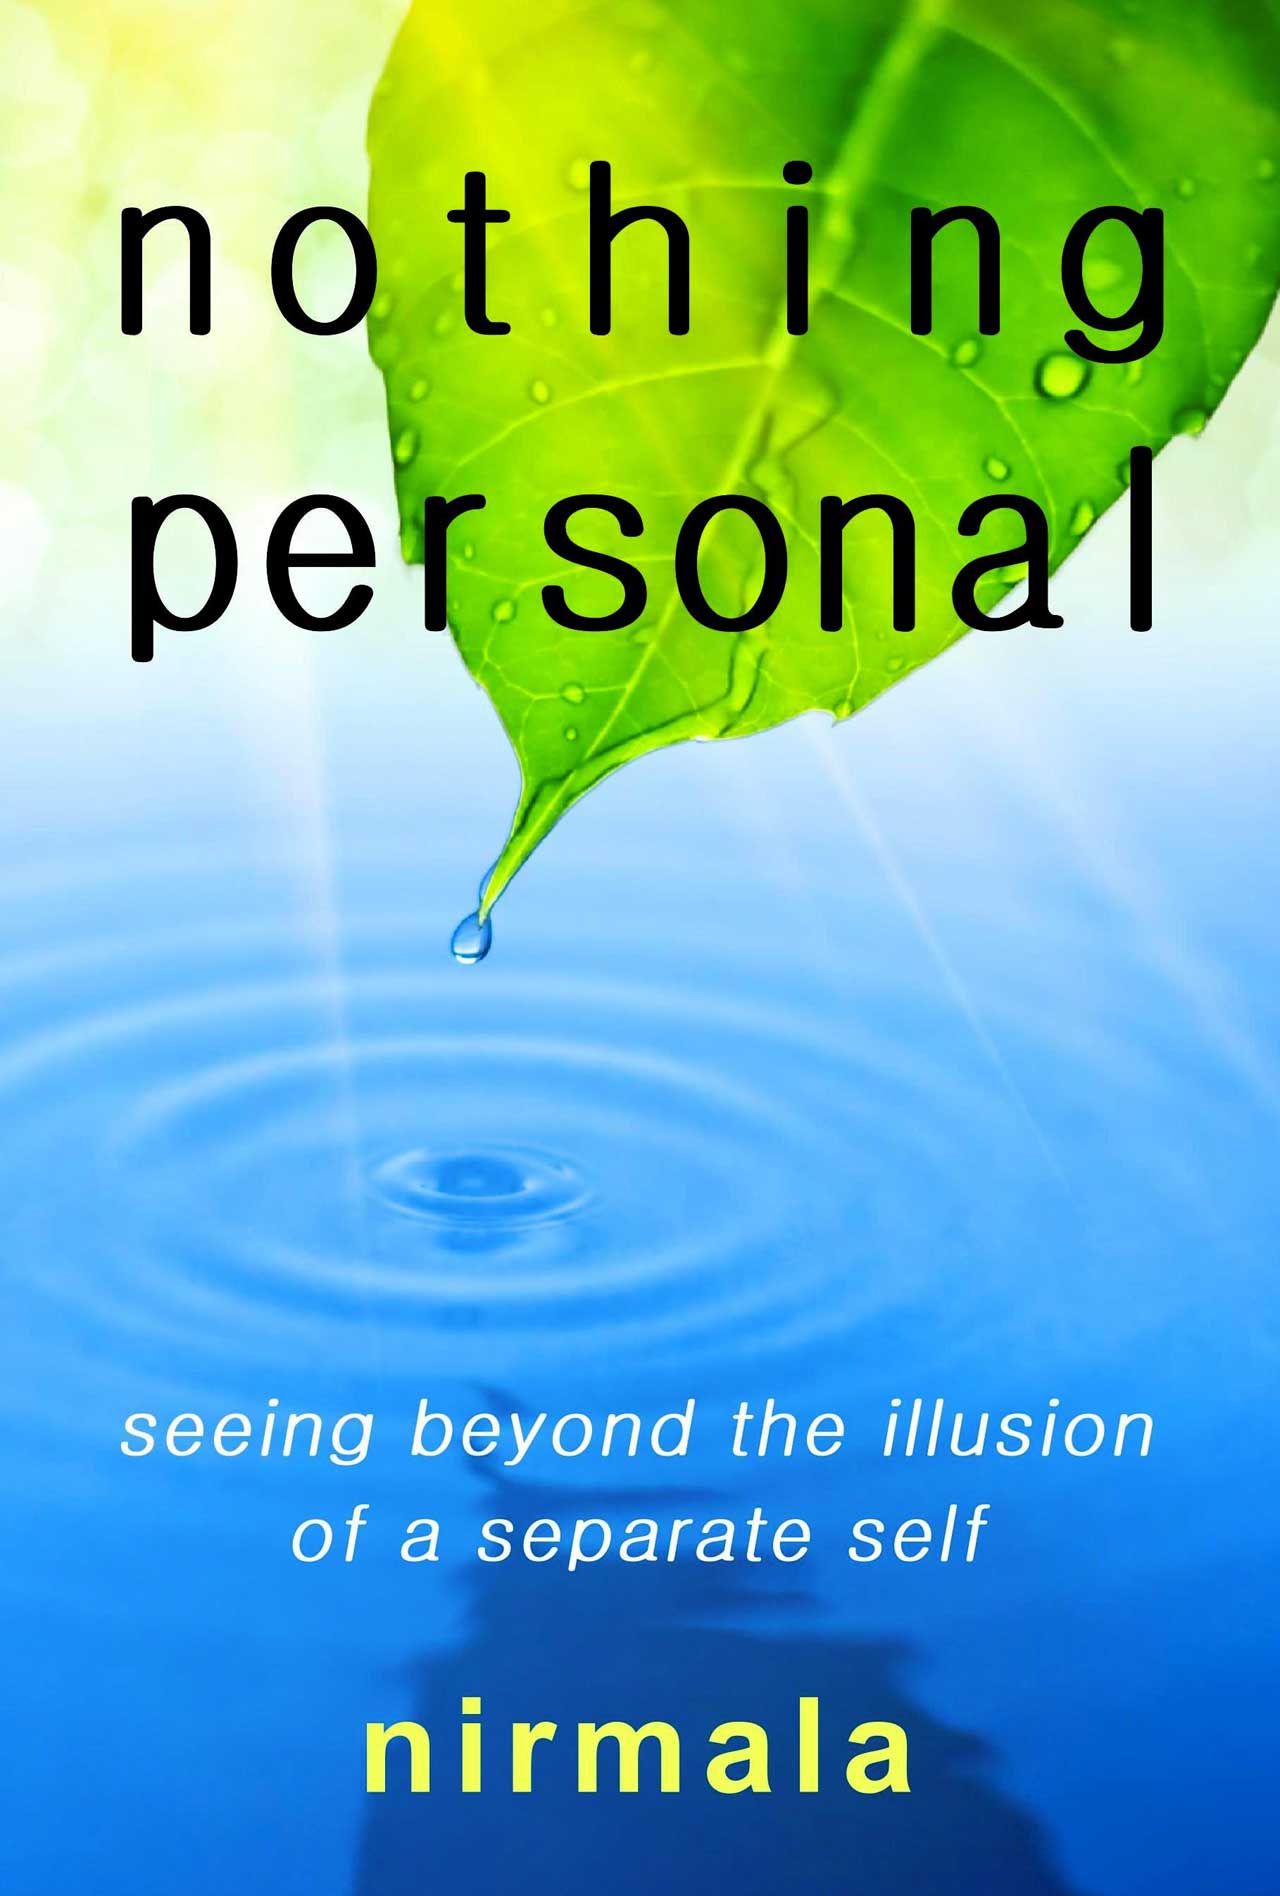 Cover of Nirmala's book, Nothing Personal